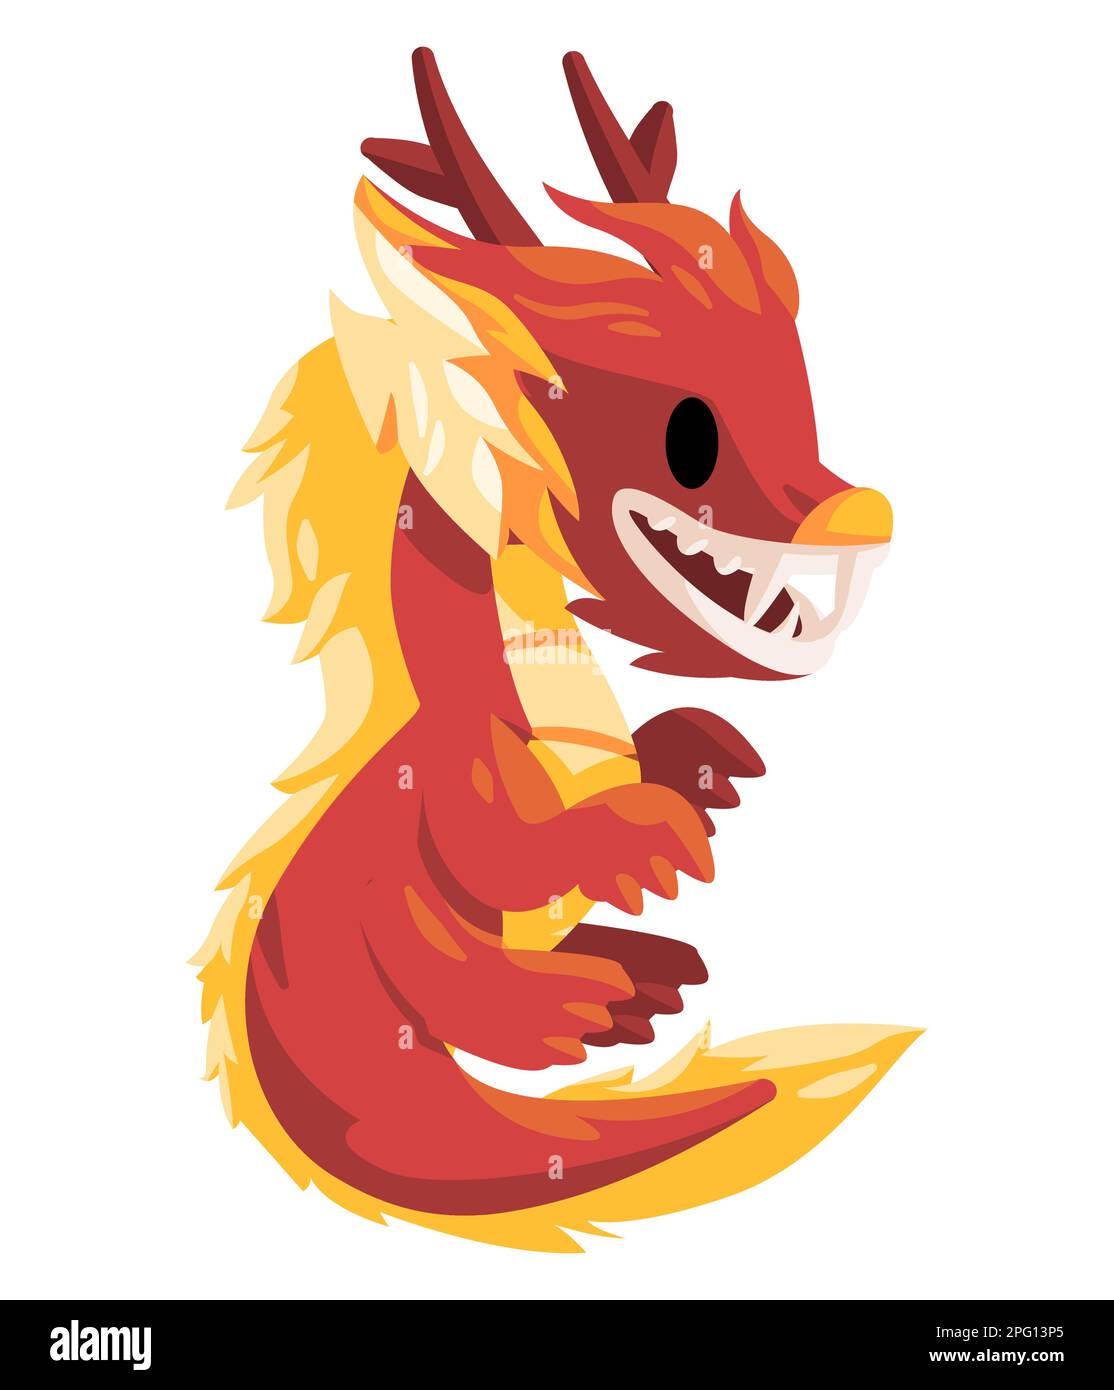 Dragon character of chinese mythology monster with funny mascot cartoon style red color Stock Vector